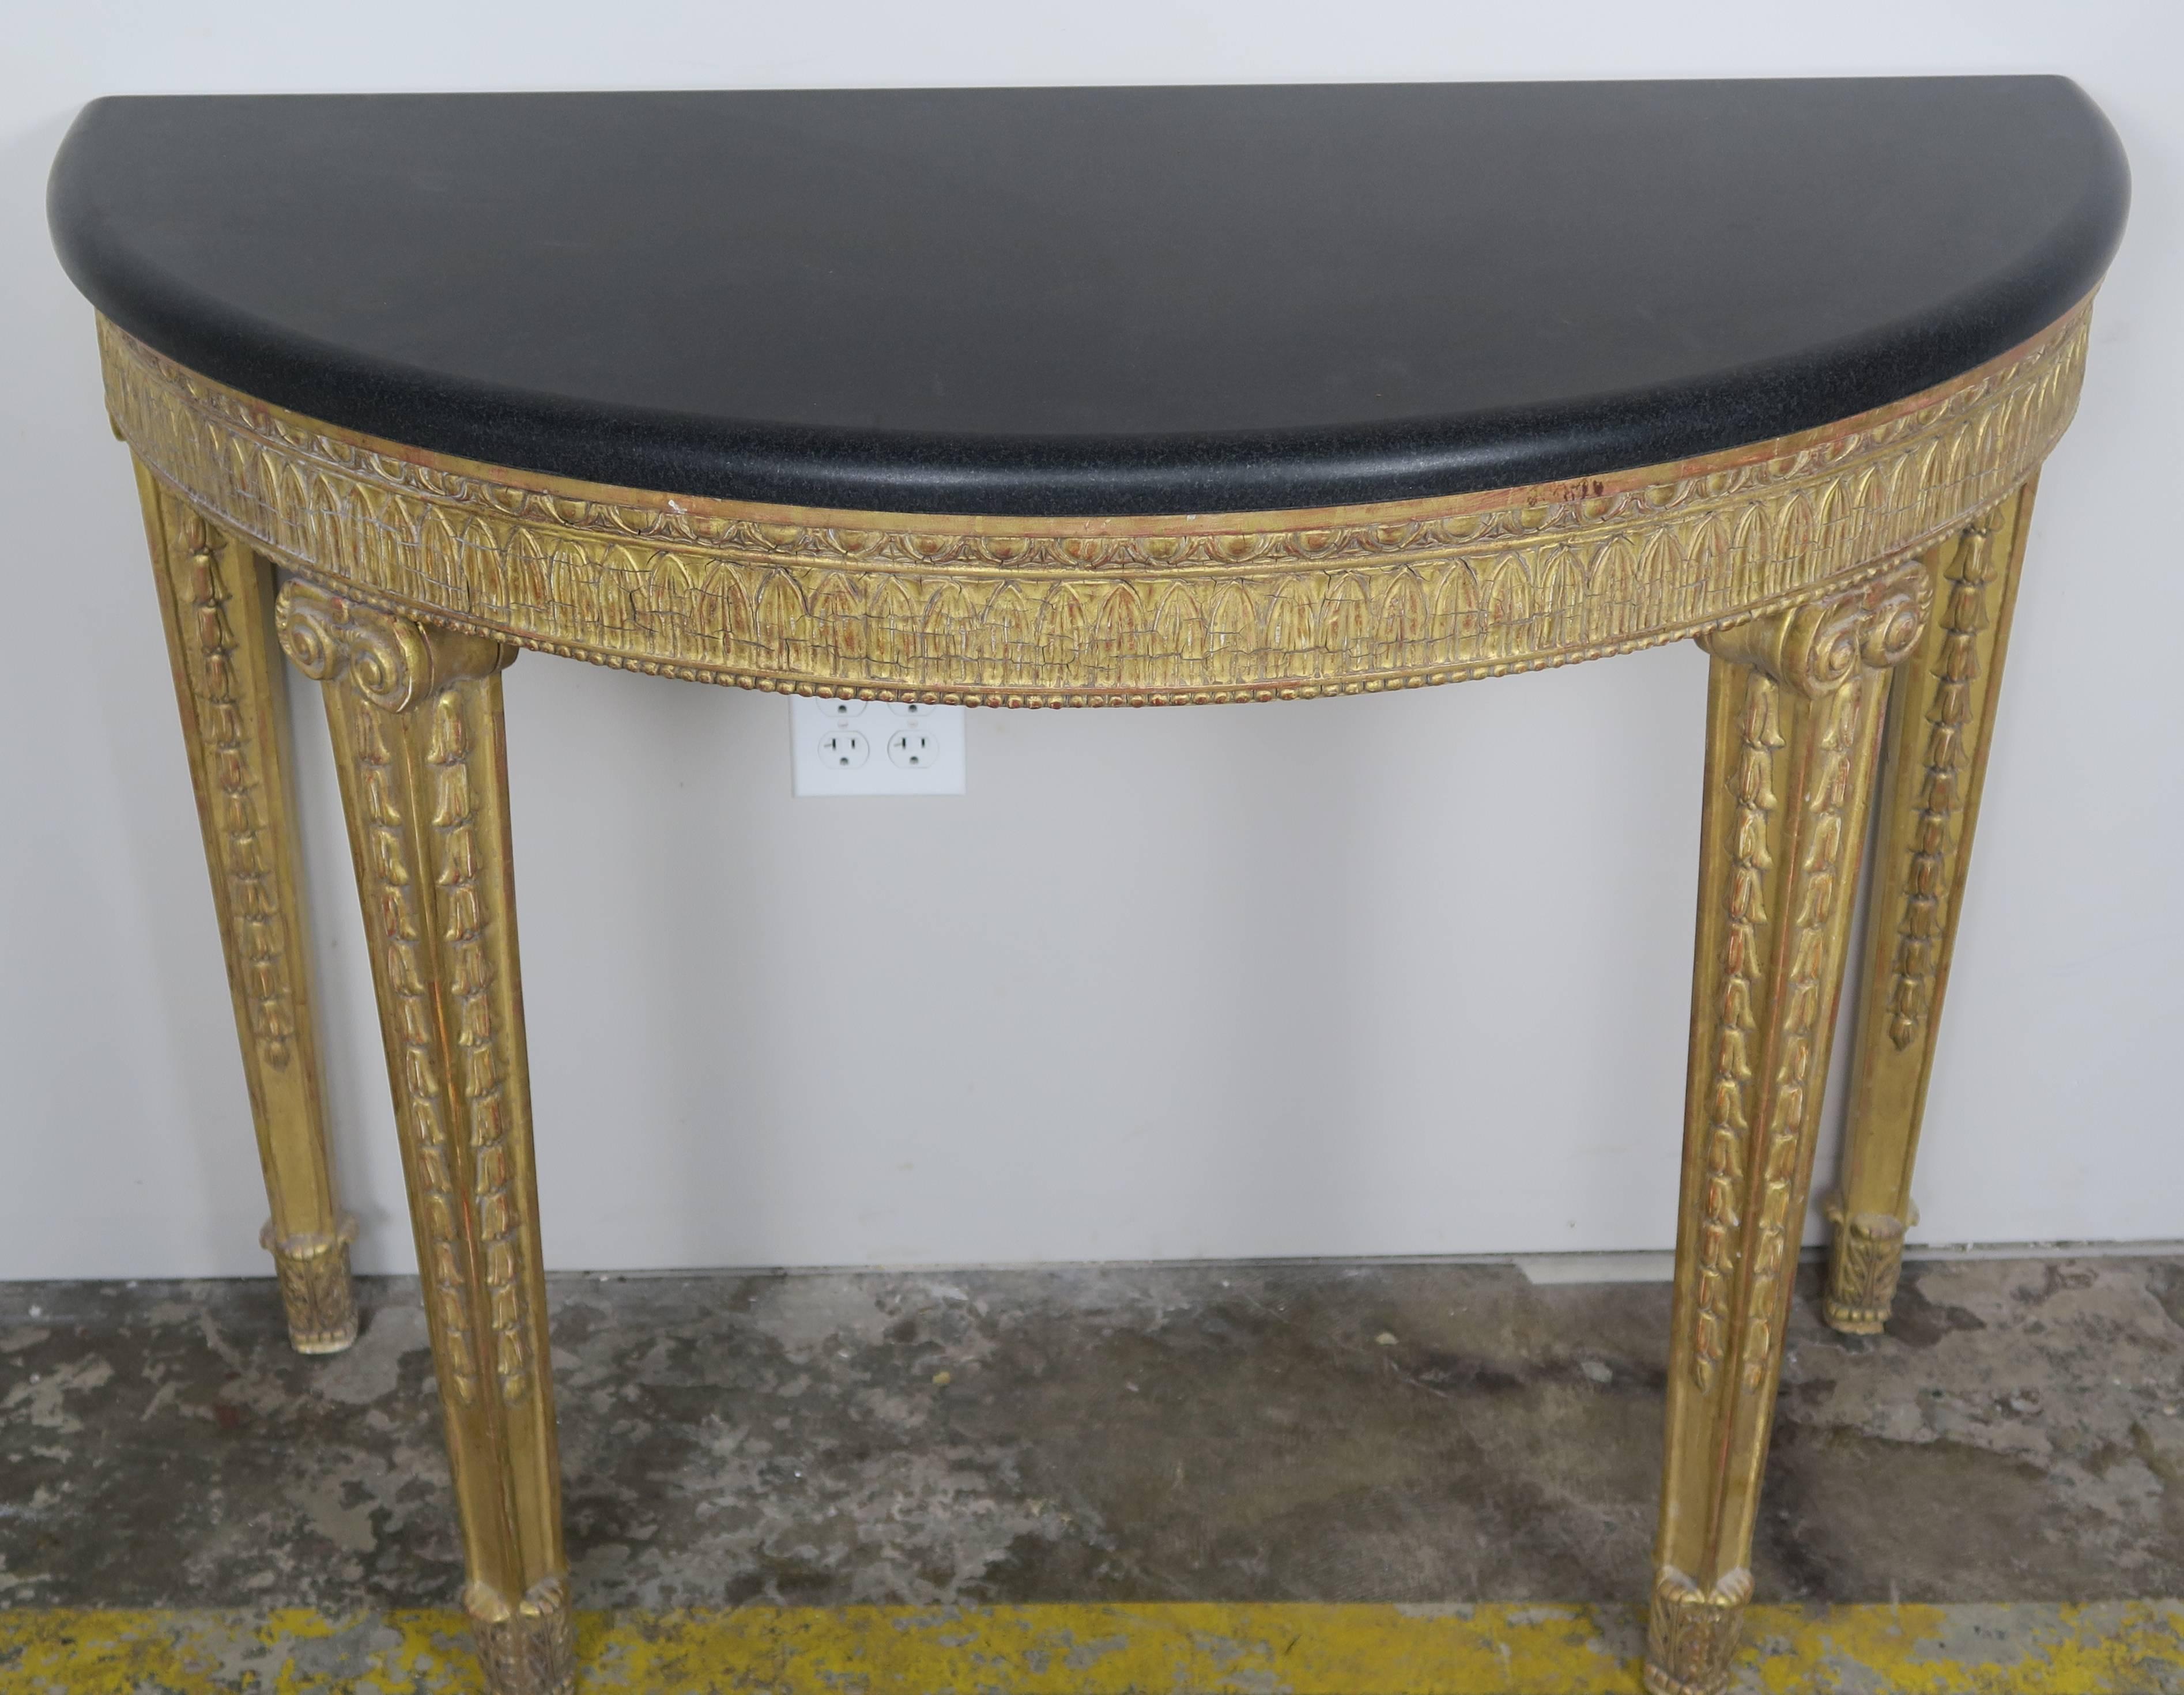 Italian neoclassical style 22-karat gold leaf carved console standing on four straight legs with a black stone top. Egg and dart carved details across the apron of the console. Bullnose edge detail on black marble-top.